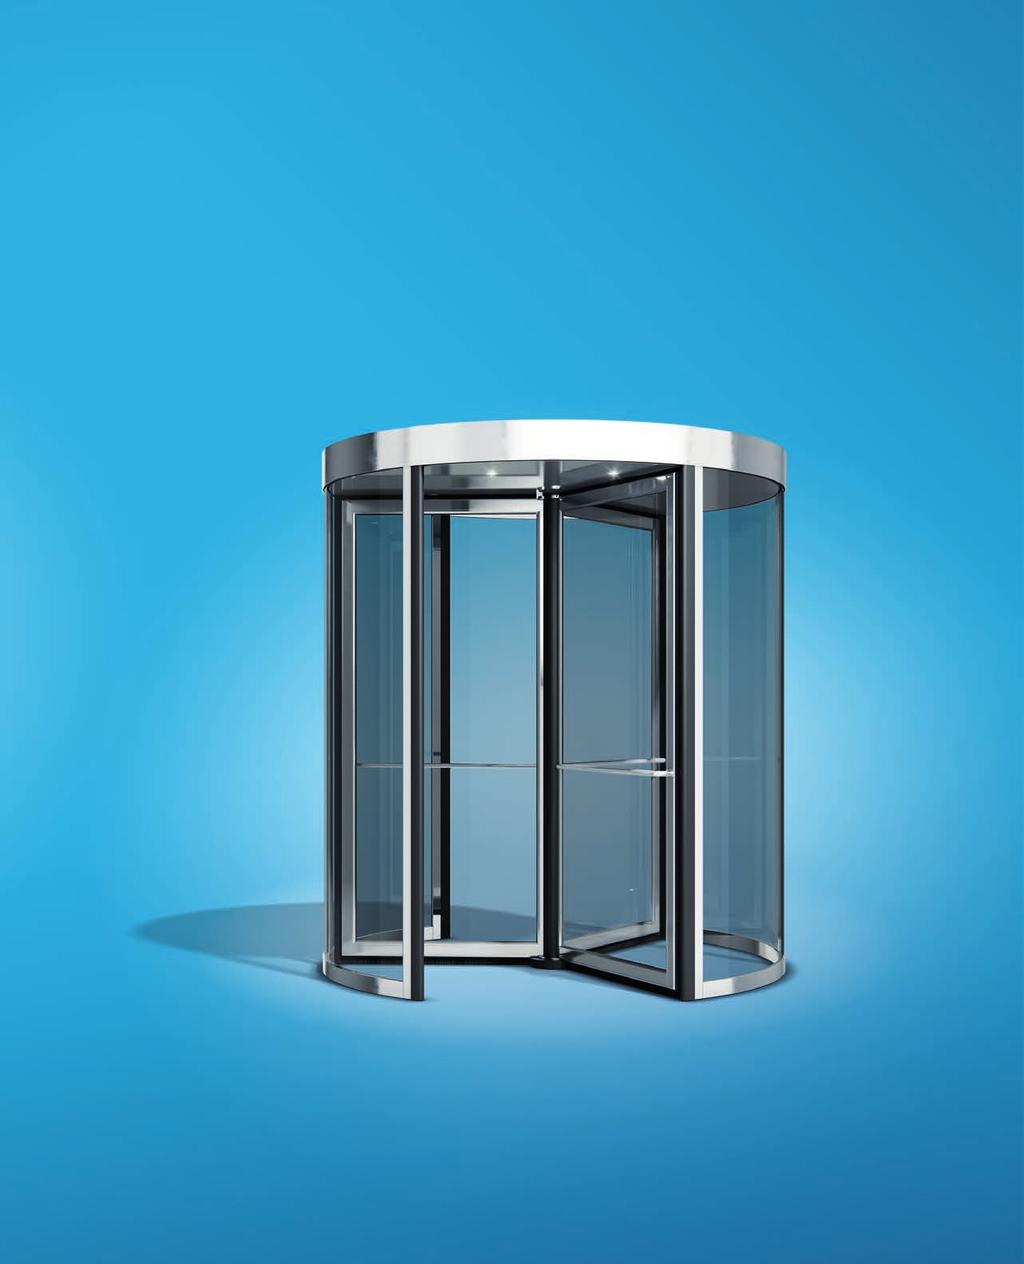 just welcomed a new member. Introducing the ASSA ABLOY RD100, the newest addition to the broad ASSA ABLOY revolving door range.